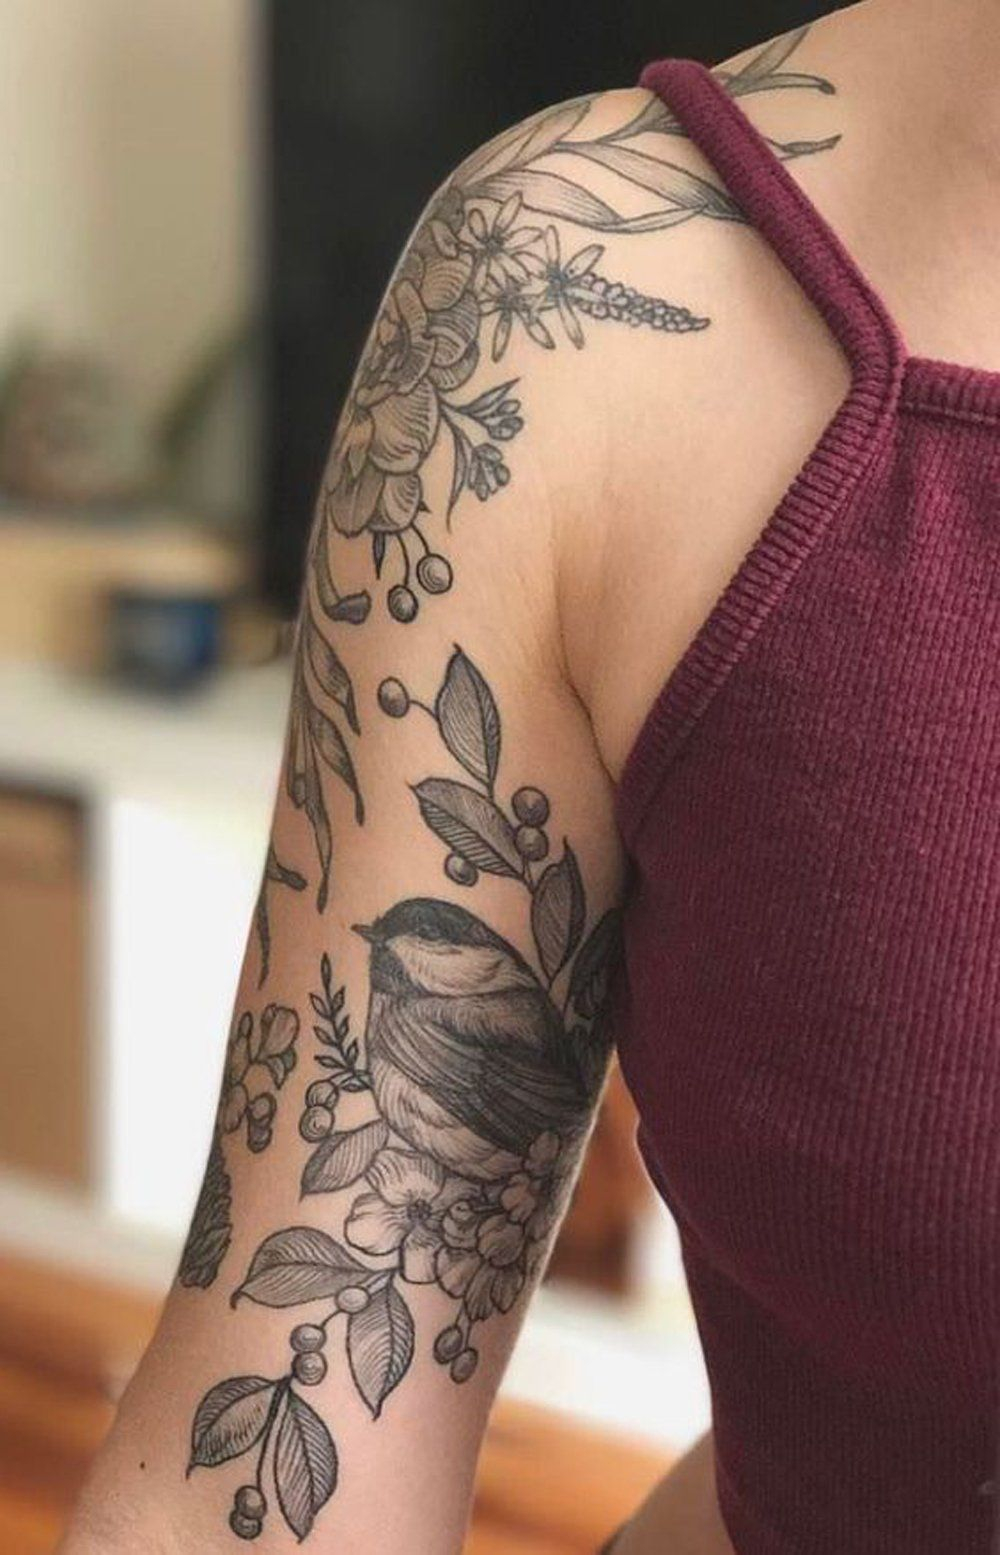 Girly Black Floral Flower Arm Sleeve Tattoo Ideas For Women in measurements 1000 X 1555